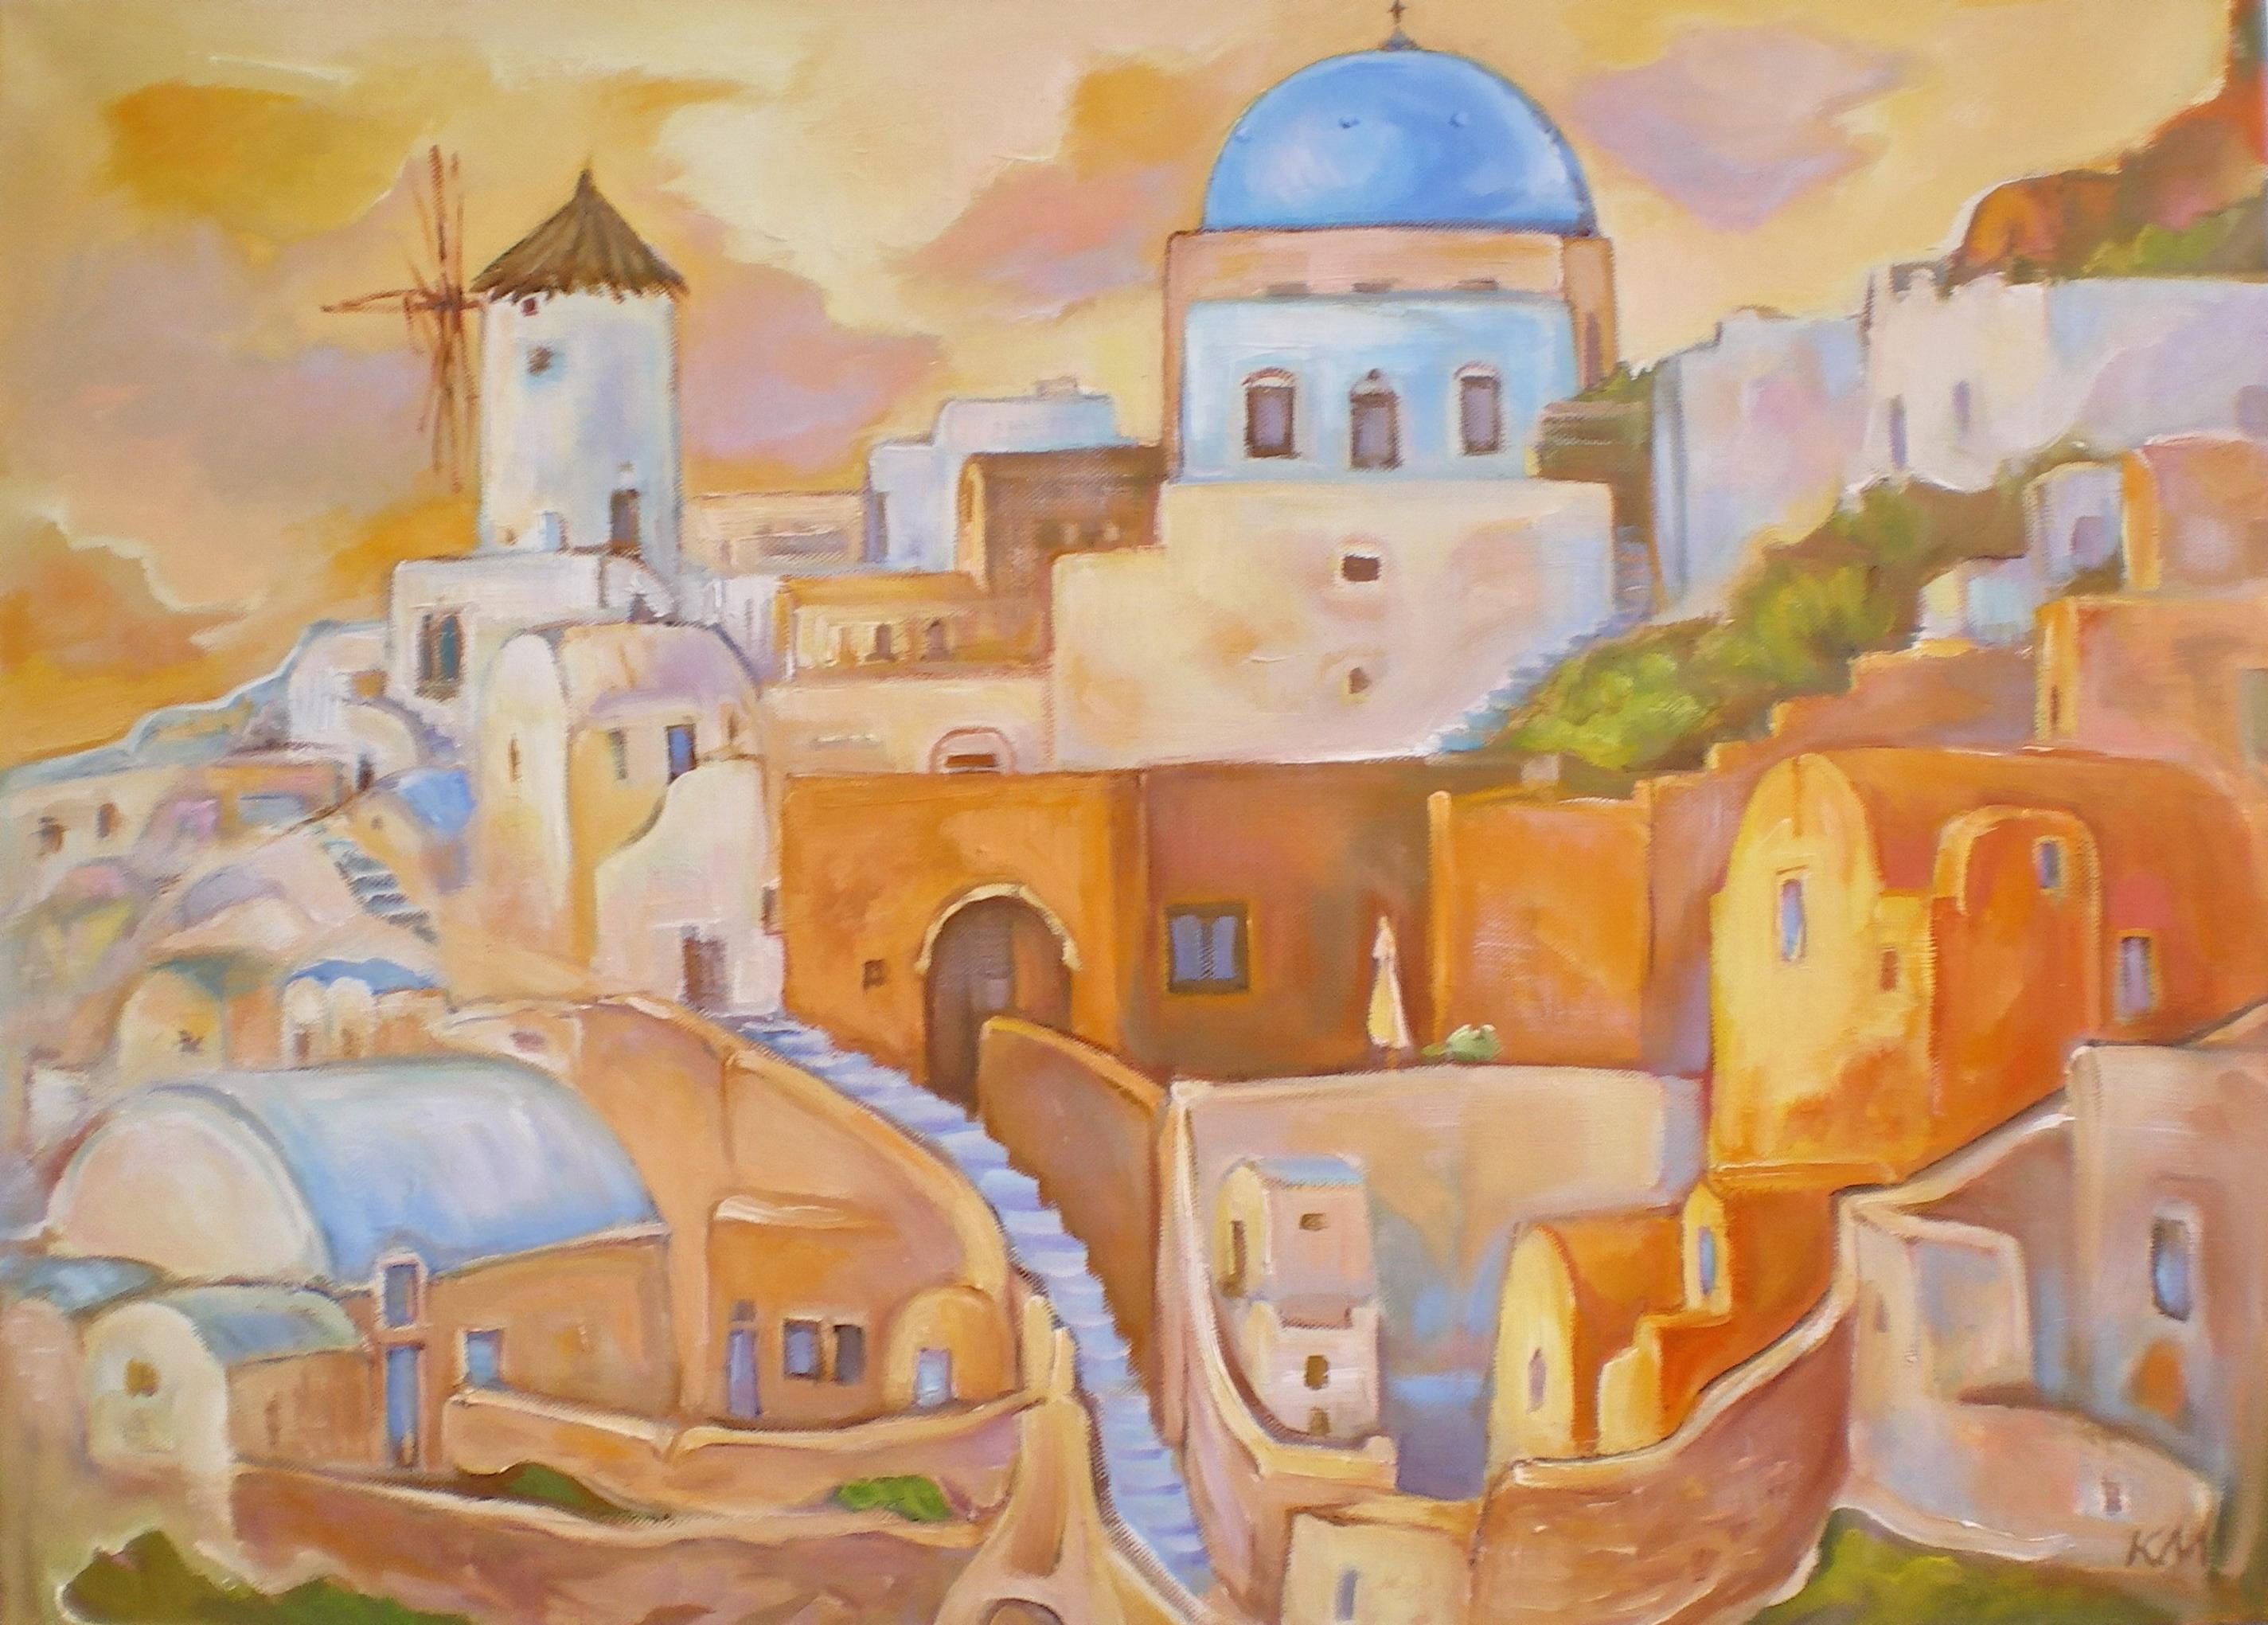 "Santorini, sunset" is an modernist painting by Maestro Krasimira Mihaylova.

About the artwork:

TECHNIQUE:  oil painting
STYLE: Impressionist, Contemporary
Edition : Unique, signed
Weight: Approximately 2 kg.

The painting is unframed.

Frame: